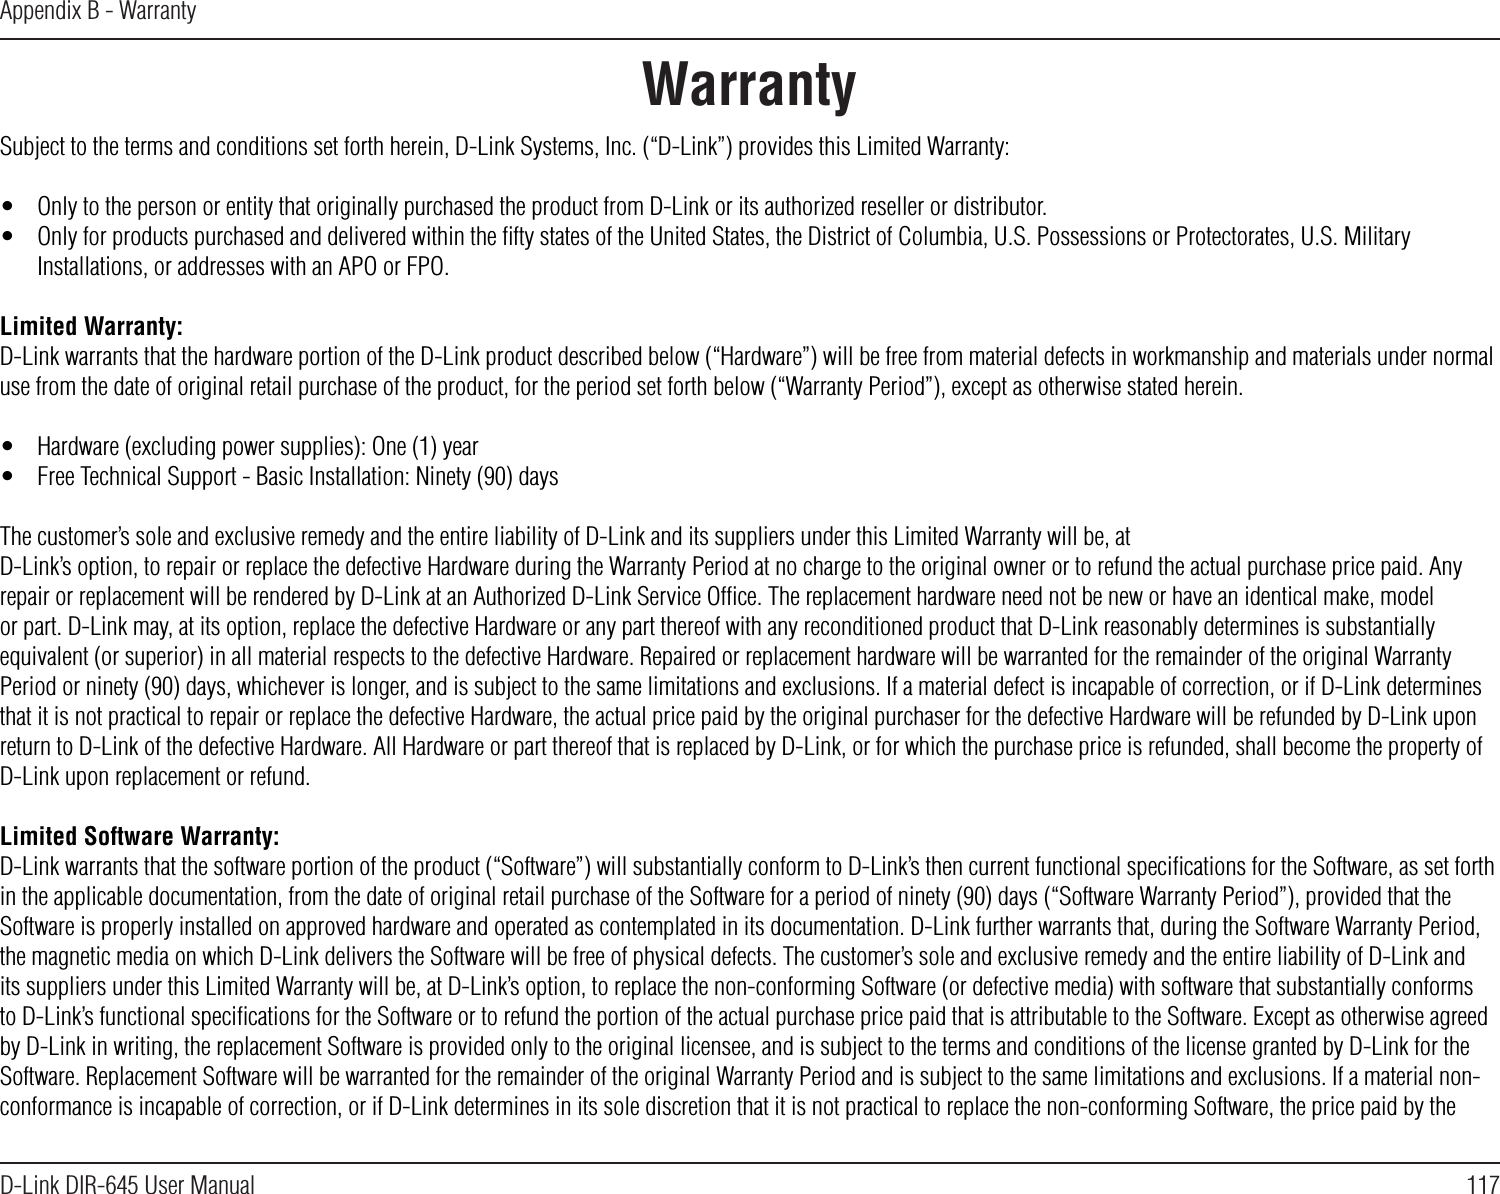 117D-Link DIR-645 User ManualAppendix B - WarrantyWarrantySubject to the terms and conditions set forth herein, D-Link Systems, Inc. (“D-Link”) provides this Limited Warranty:•  Only to the person or entity that originally purchased the product from D-Link or its authorized reseller or distributor.•  Only for products purchased and delivered within the ﬁfty states of the United States, the District of Columbia, U.S. Possessions or Protectorates, U.S. Military Installations, or addresses with an APO or FPO.Limited Warranty:D-Link warrants that the hardware portion of the D-Link product described below (“Hardware”) will be free from material defects in workmanship and materials under normal use from the date of original retail purchase of the product, for the period set forth below (“Warranty Period”), except as otherwise stated herein.•  Hardware (excluding power supplies): One (1) year•  Free Technical Support - Basic Installation: Ninety (90) daysThe customer’s sole and exclusive remedy and the entire liability of D-Link and its suppliers under this Limited Warranty will be, atD-Link’s option, to repair or replace the defective Hardware during the Warranty Period at no charge to the original owner or to refund the actual purchase price paid. Any repair or replacement will be rendered by D-Link at an Authorized D-Link Service Ofﬁce. The replacement hardware need not be new or have an identical make, model or part. D-Link may, at its option, replace the defective Hardware or any part thereof with any reconditioned product that D-Link reasonably determines is substantially equivalent (or superior) in all material respects to the defective Hardware. Repaired or replacement hardware will be warranted for the remainder of the original Warranty Period or ninety (90) days, whichever is longer, and is subject to the same limitations and exclusions. If a material defect is incapable of correction, or if D-Link determines that it is not practical to repair or replace the defective Hardware, the actual price paid by the original purchaser for the defective Hardware will be refunded by D-Link upon return to D-Link of the defective Hardware. All Hardware or part thereof that is replaced by D-Link, or for which the purchase price is refunded, shall become the property of D-Link upon replacement or refund.Limited Software Warranty:D-Link warrants that the software portion of the product (“Software”) will substantially conform to D-Link’s then current functional speciﬁcations for the Software, as set forth in the applicable documentation, from the date of original retail purchase of the Software for a period of ninety (90) days (“Software Warranty Period”), provided that the Software is properly installed on approved hardware and operated as contemplated in its documentation. D-Link further warrants that, during the Software Warranty Period, the magnetic media on which D-Link delivers the Software will be free of physical defects. The customer’s sole and exclusive remedy and the entire liability of D-Link and its suppliers under this Limited Warranty will be, at D-Link’s option, to replace the non-conforming Software (or defective media) with software that substantially conforms to D-Link’s functional speciﬁcations for the Software or to refund the portion of the actual purchase price paid that is attributable to the Software. Except as otherwise agreed by D-Link in writing, the replacement Software is provided only to the original licensee, and is subject to the terms and conditions of the license granted by D-Link for the Software. Replacement Software will be warranted for the remainder of the original Warranty Period and is subject to the same limitations and exclusions. If a material non-conformance is incapable of correction, or if D-Link determines in its sole discretion that it is not practical to replace the non-conforming Software, the price paid by the